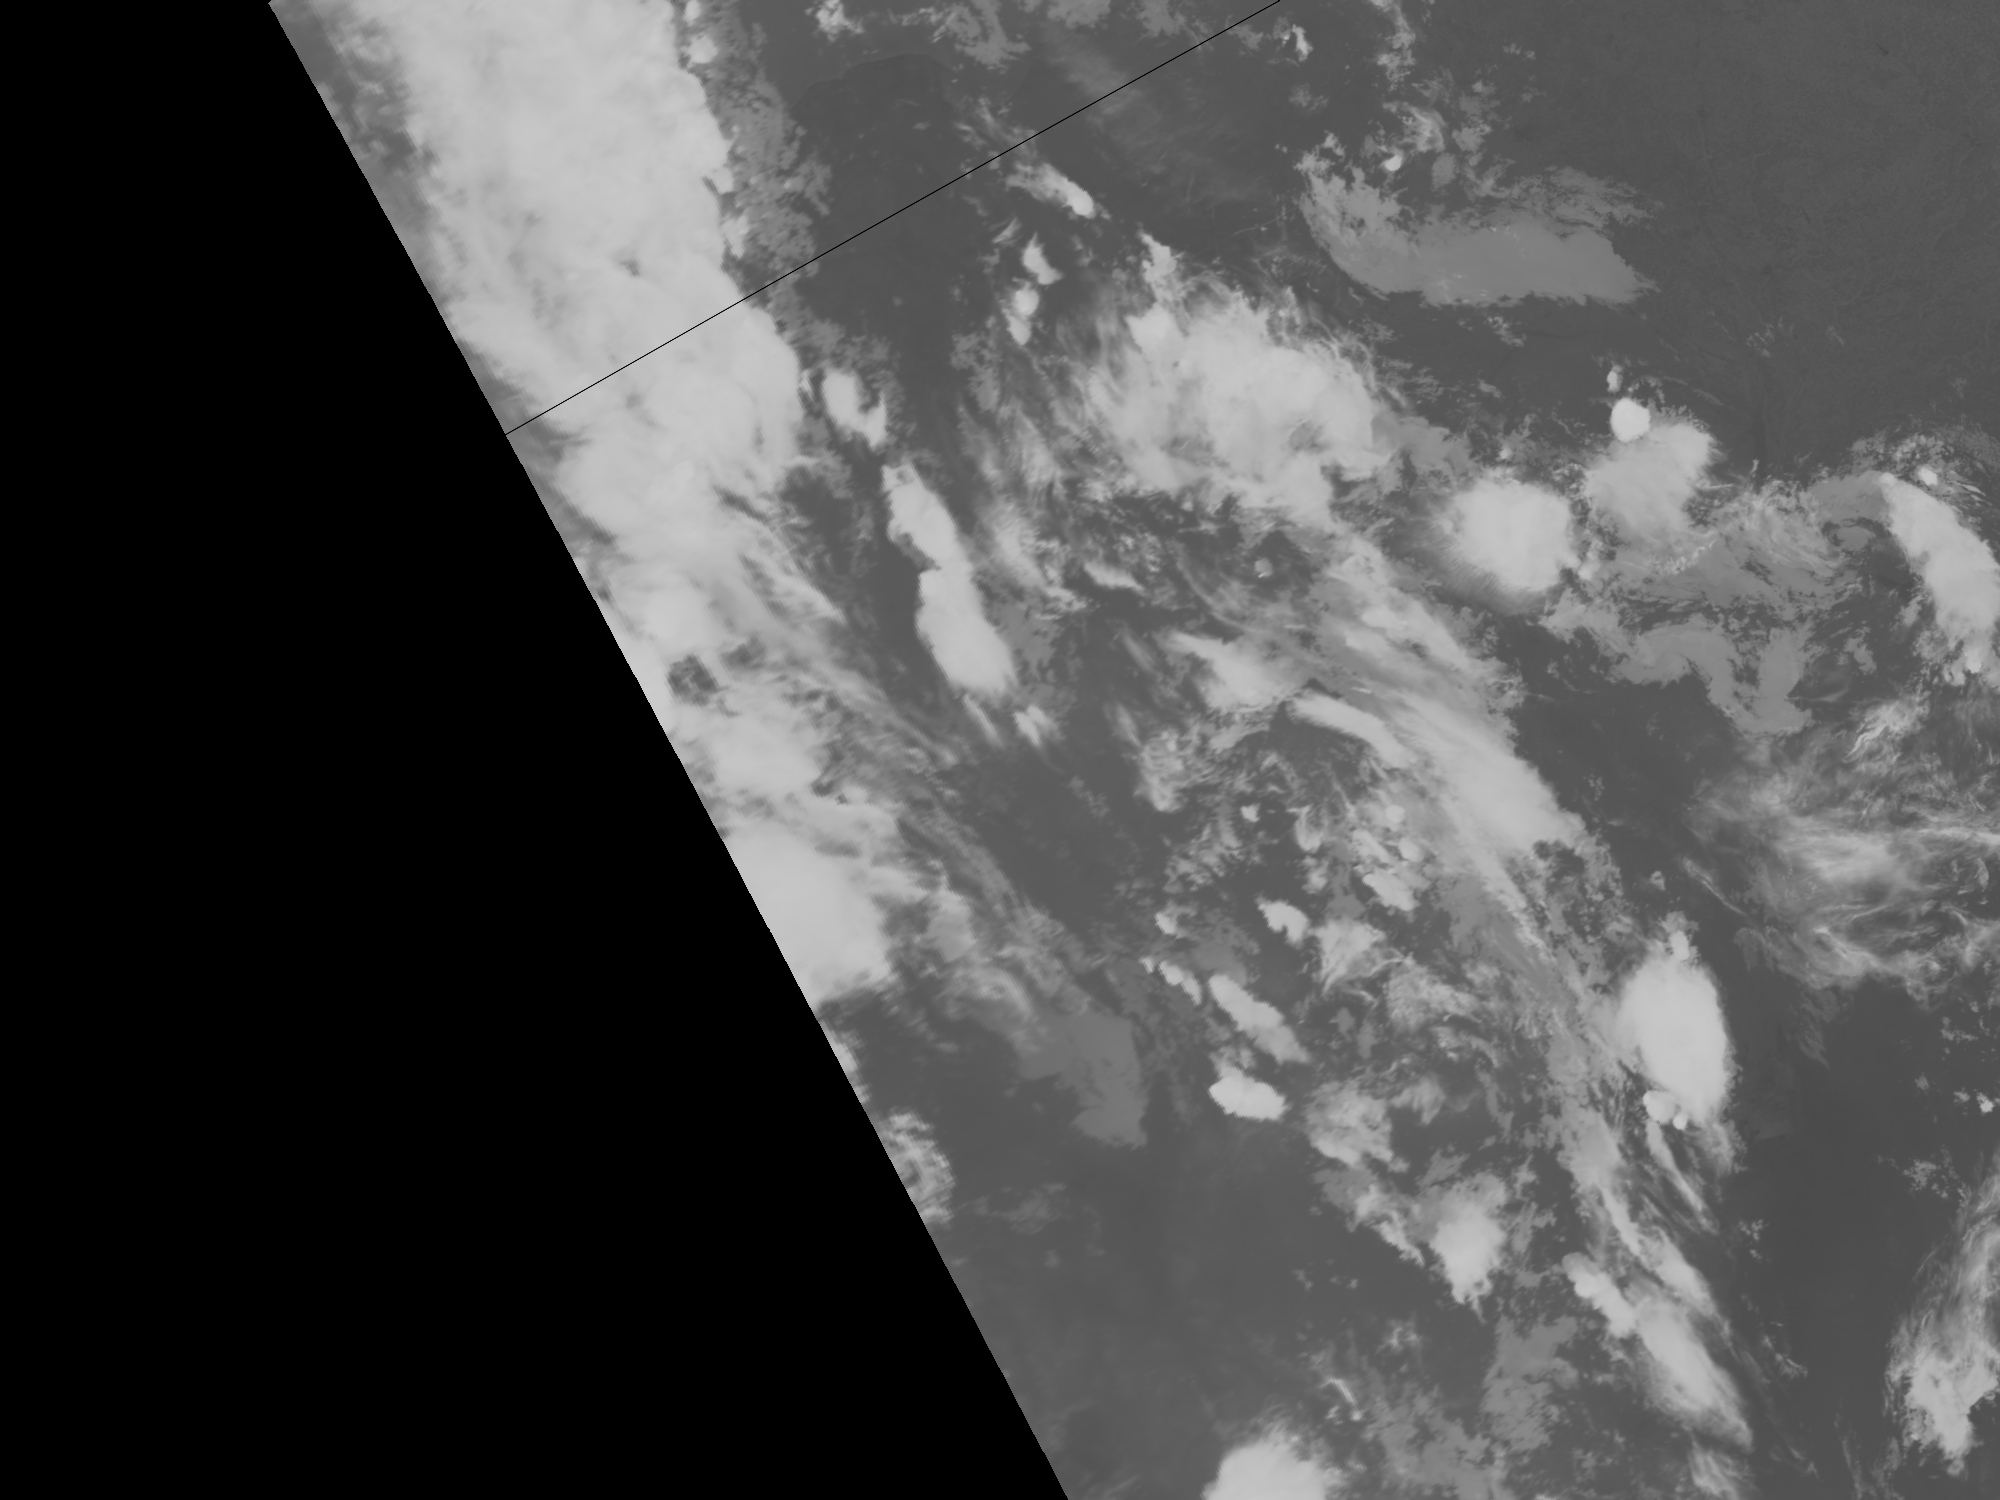 MetOp-B image with missing line